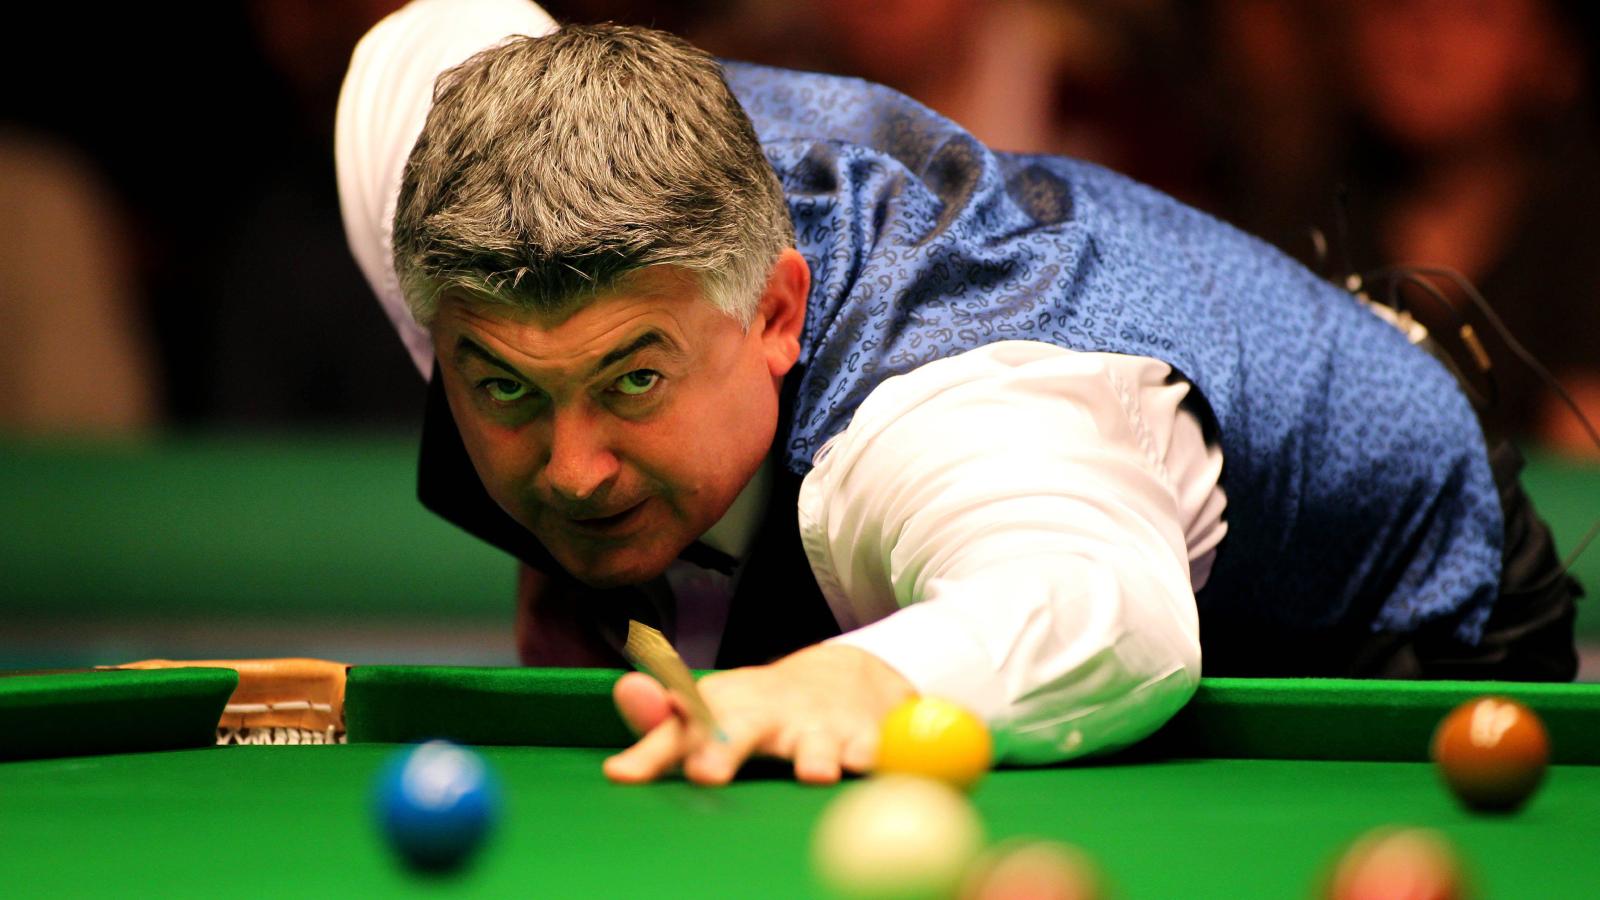 Top 10 Richest Snooker Players In The World 